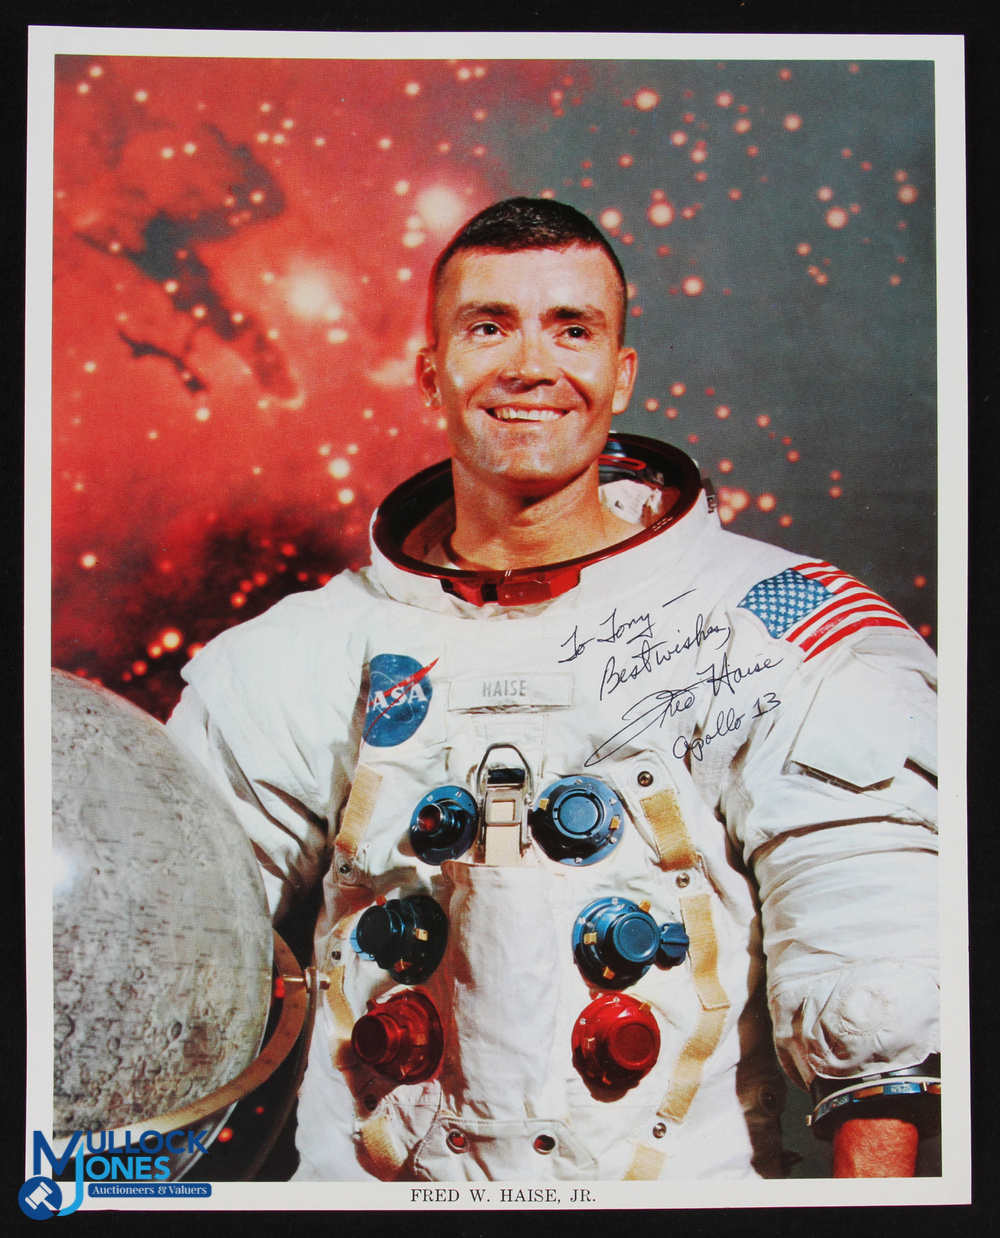 NASA - Charles Duke - Apollo 16 - colour 10x8 showing Duke seated in space suit signed across the - Image 2 of 2